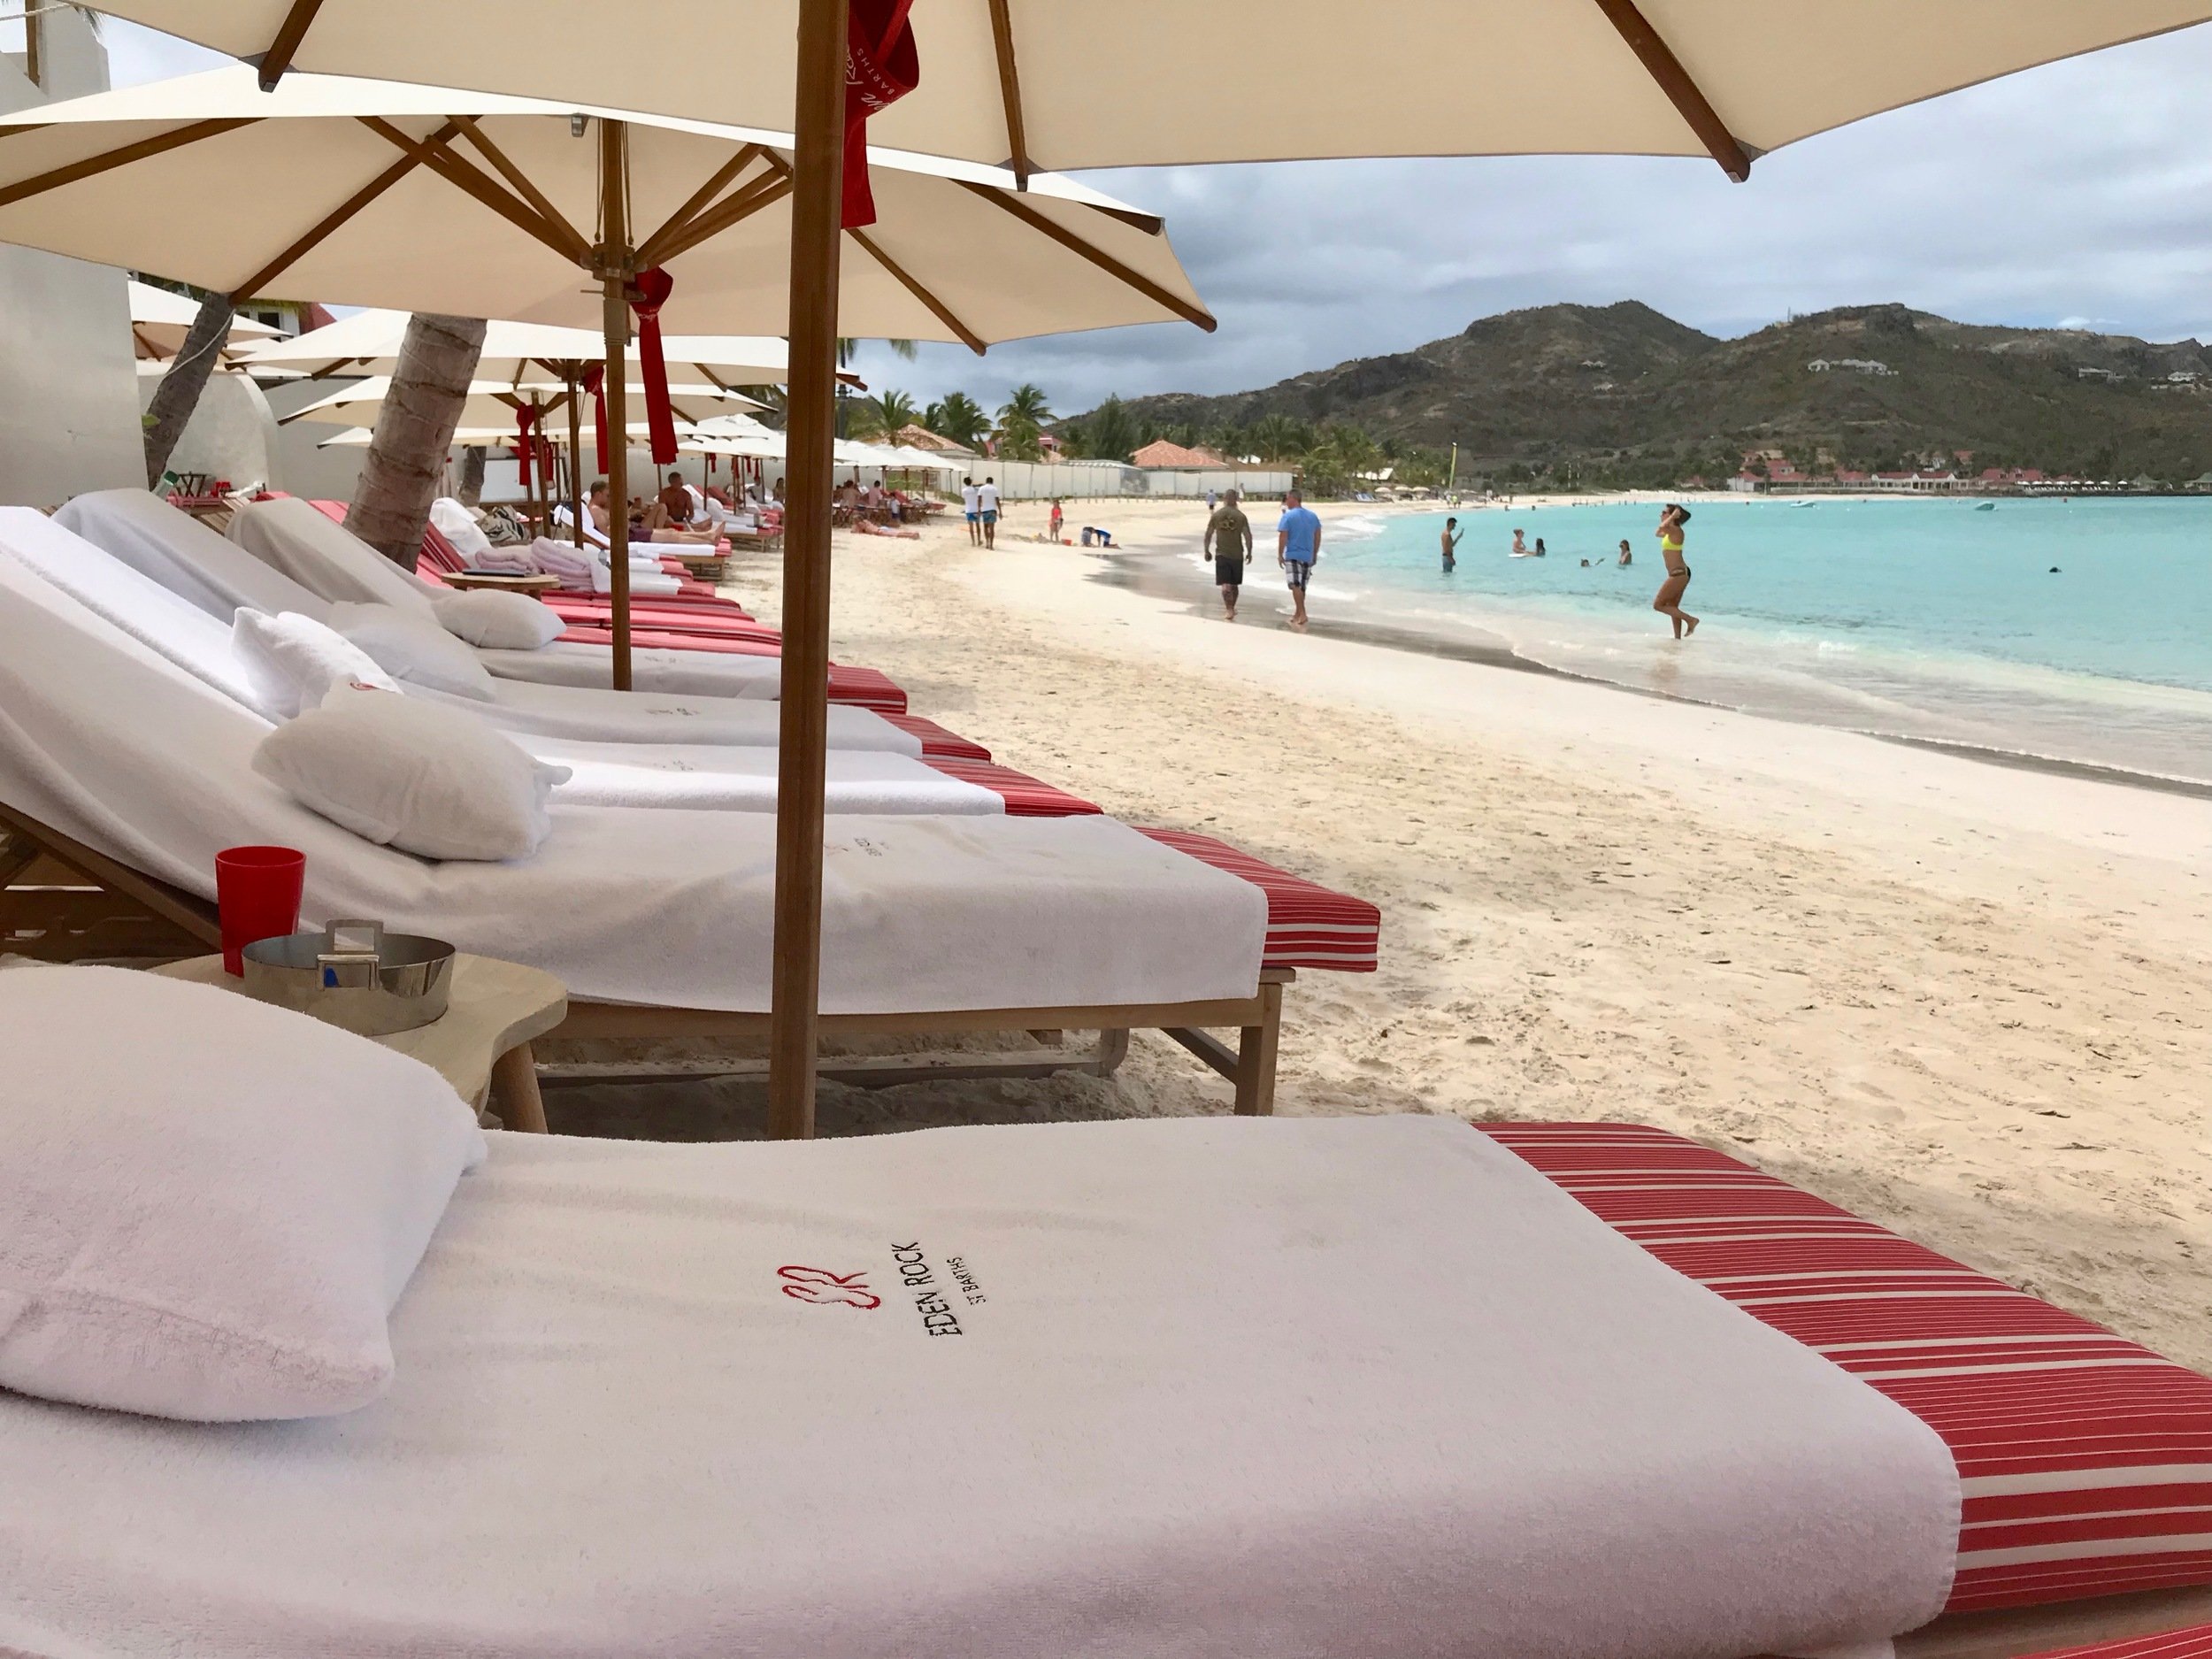 The Best St. Barts Beaches